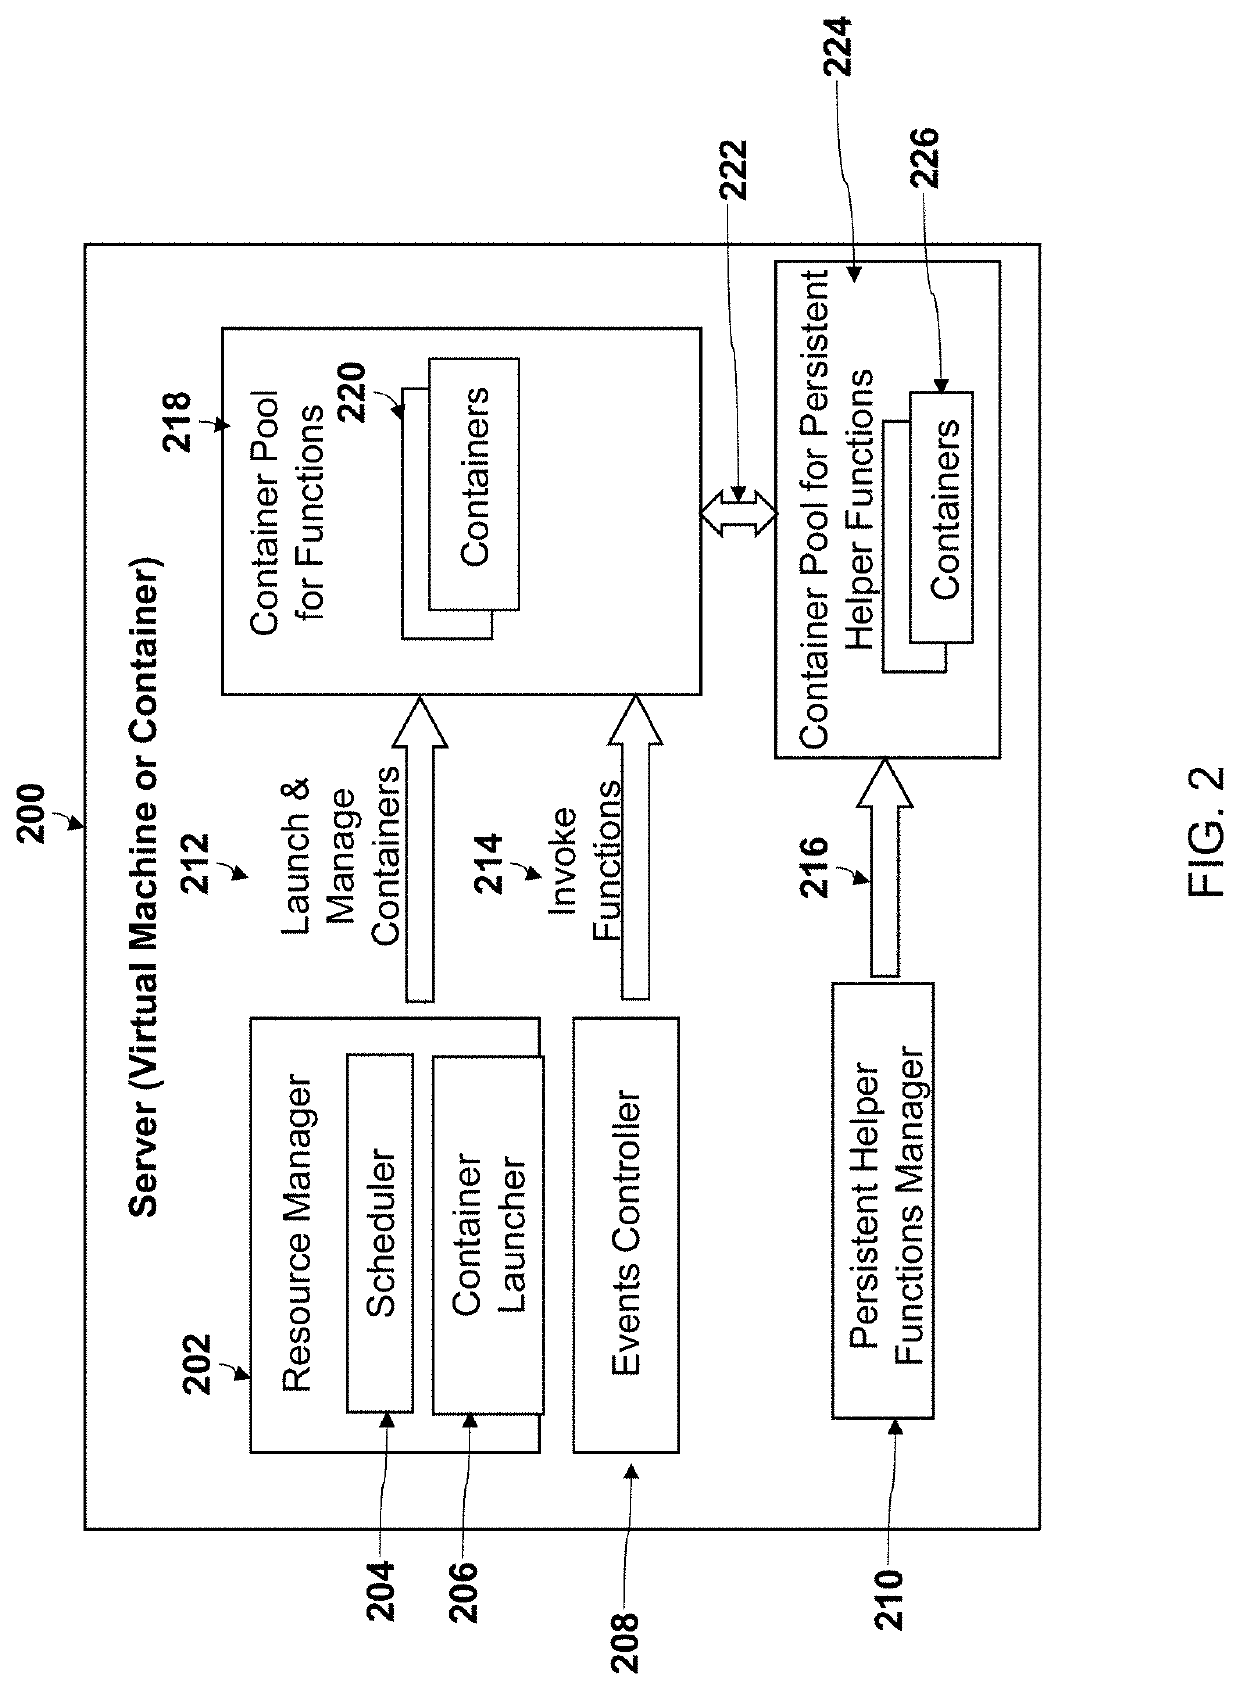 Method and system for persistent helpers for functions as a service (FAAS) in cloud computing environments